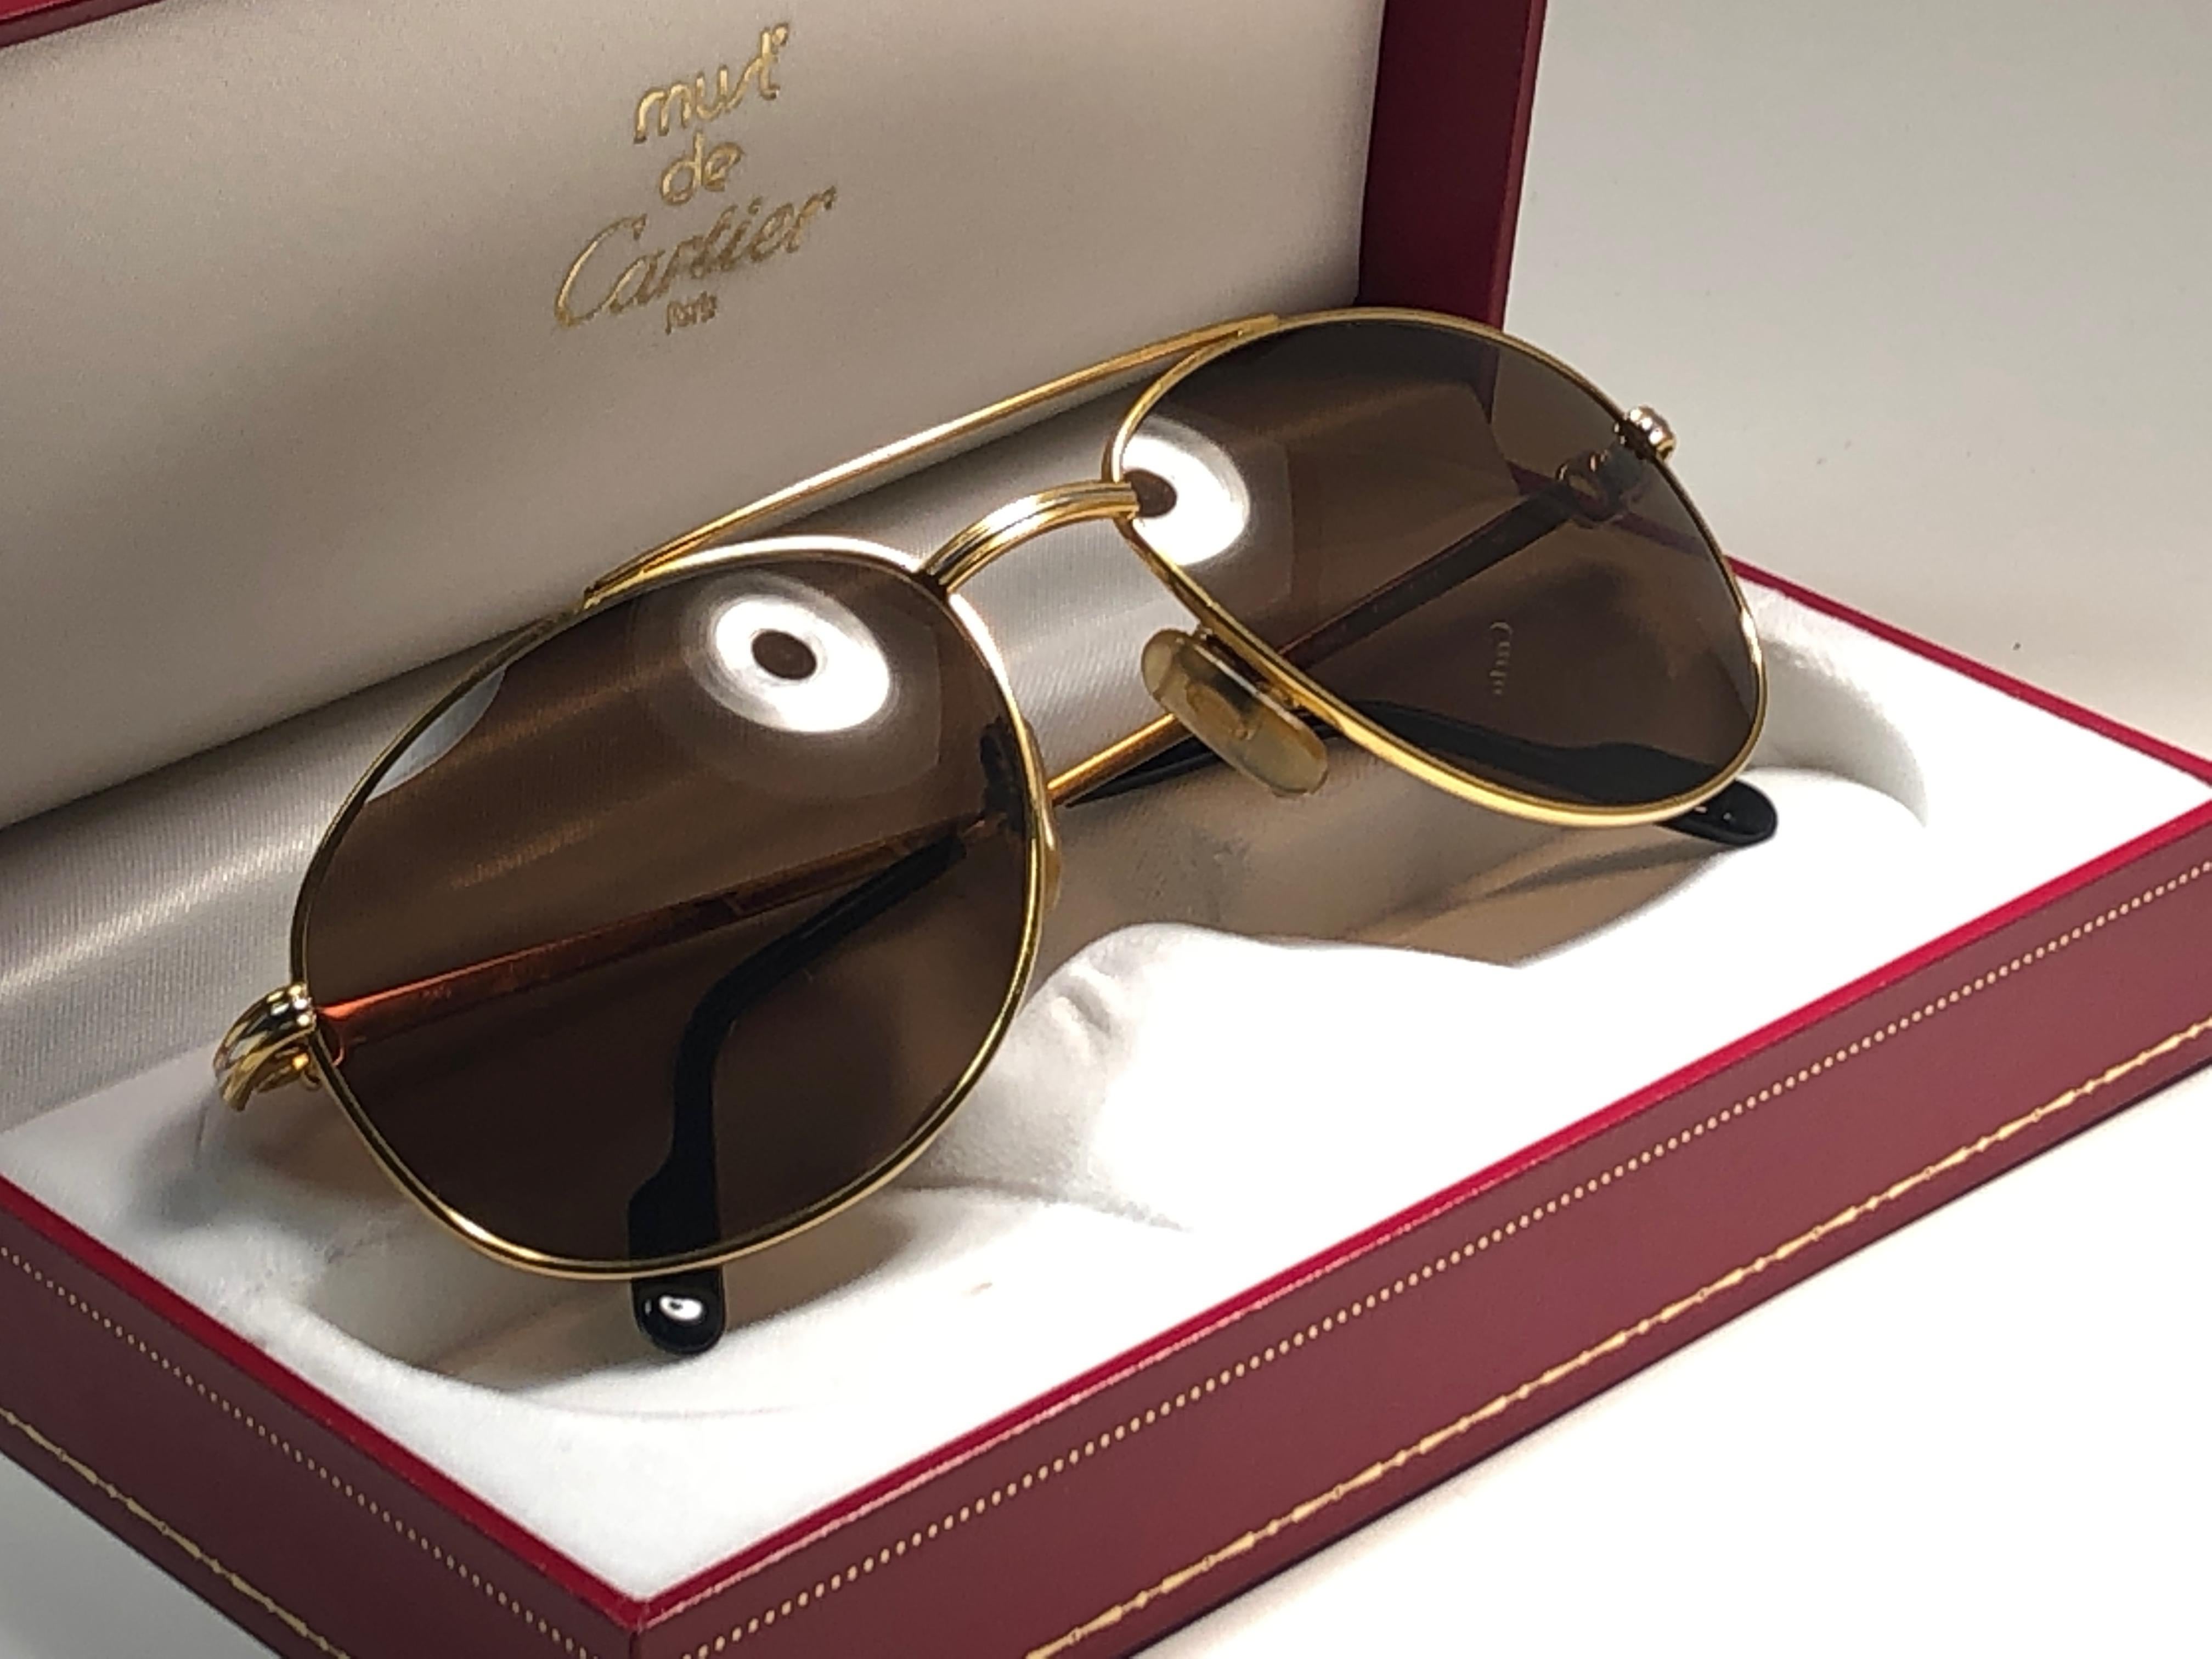 New condition 1990 Cartier Driver 54 [] 18 Sunglasses with brown (uv protection) lenses. All hallmarks. Cartier gold signs on the ear paddles. These are like a pair of jewels on your nose. 
Please notice that this sunglasses are nearly 30 years old